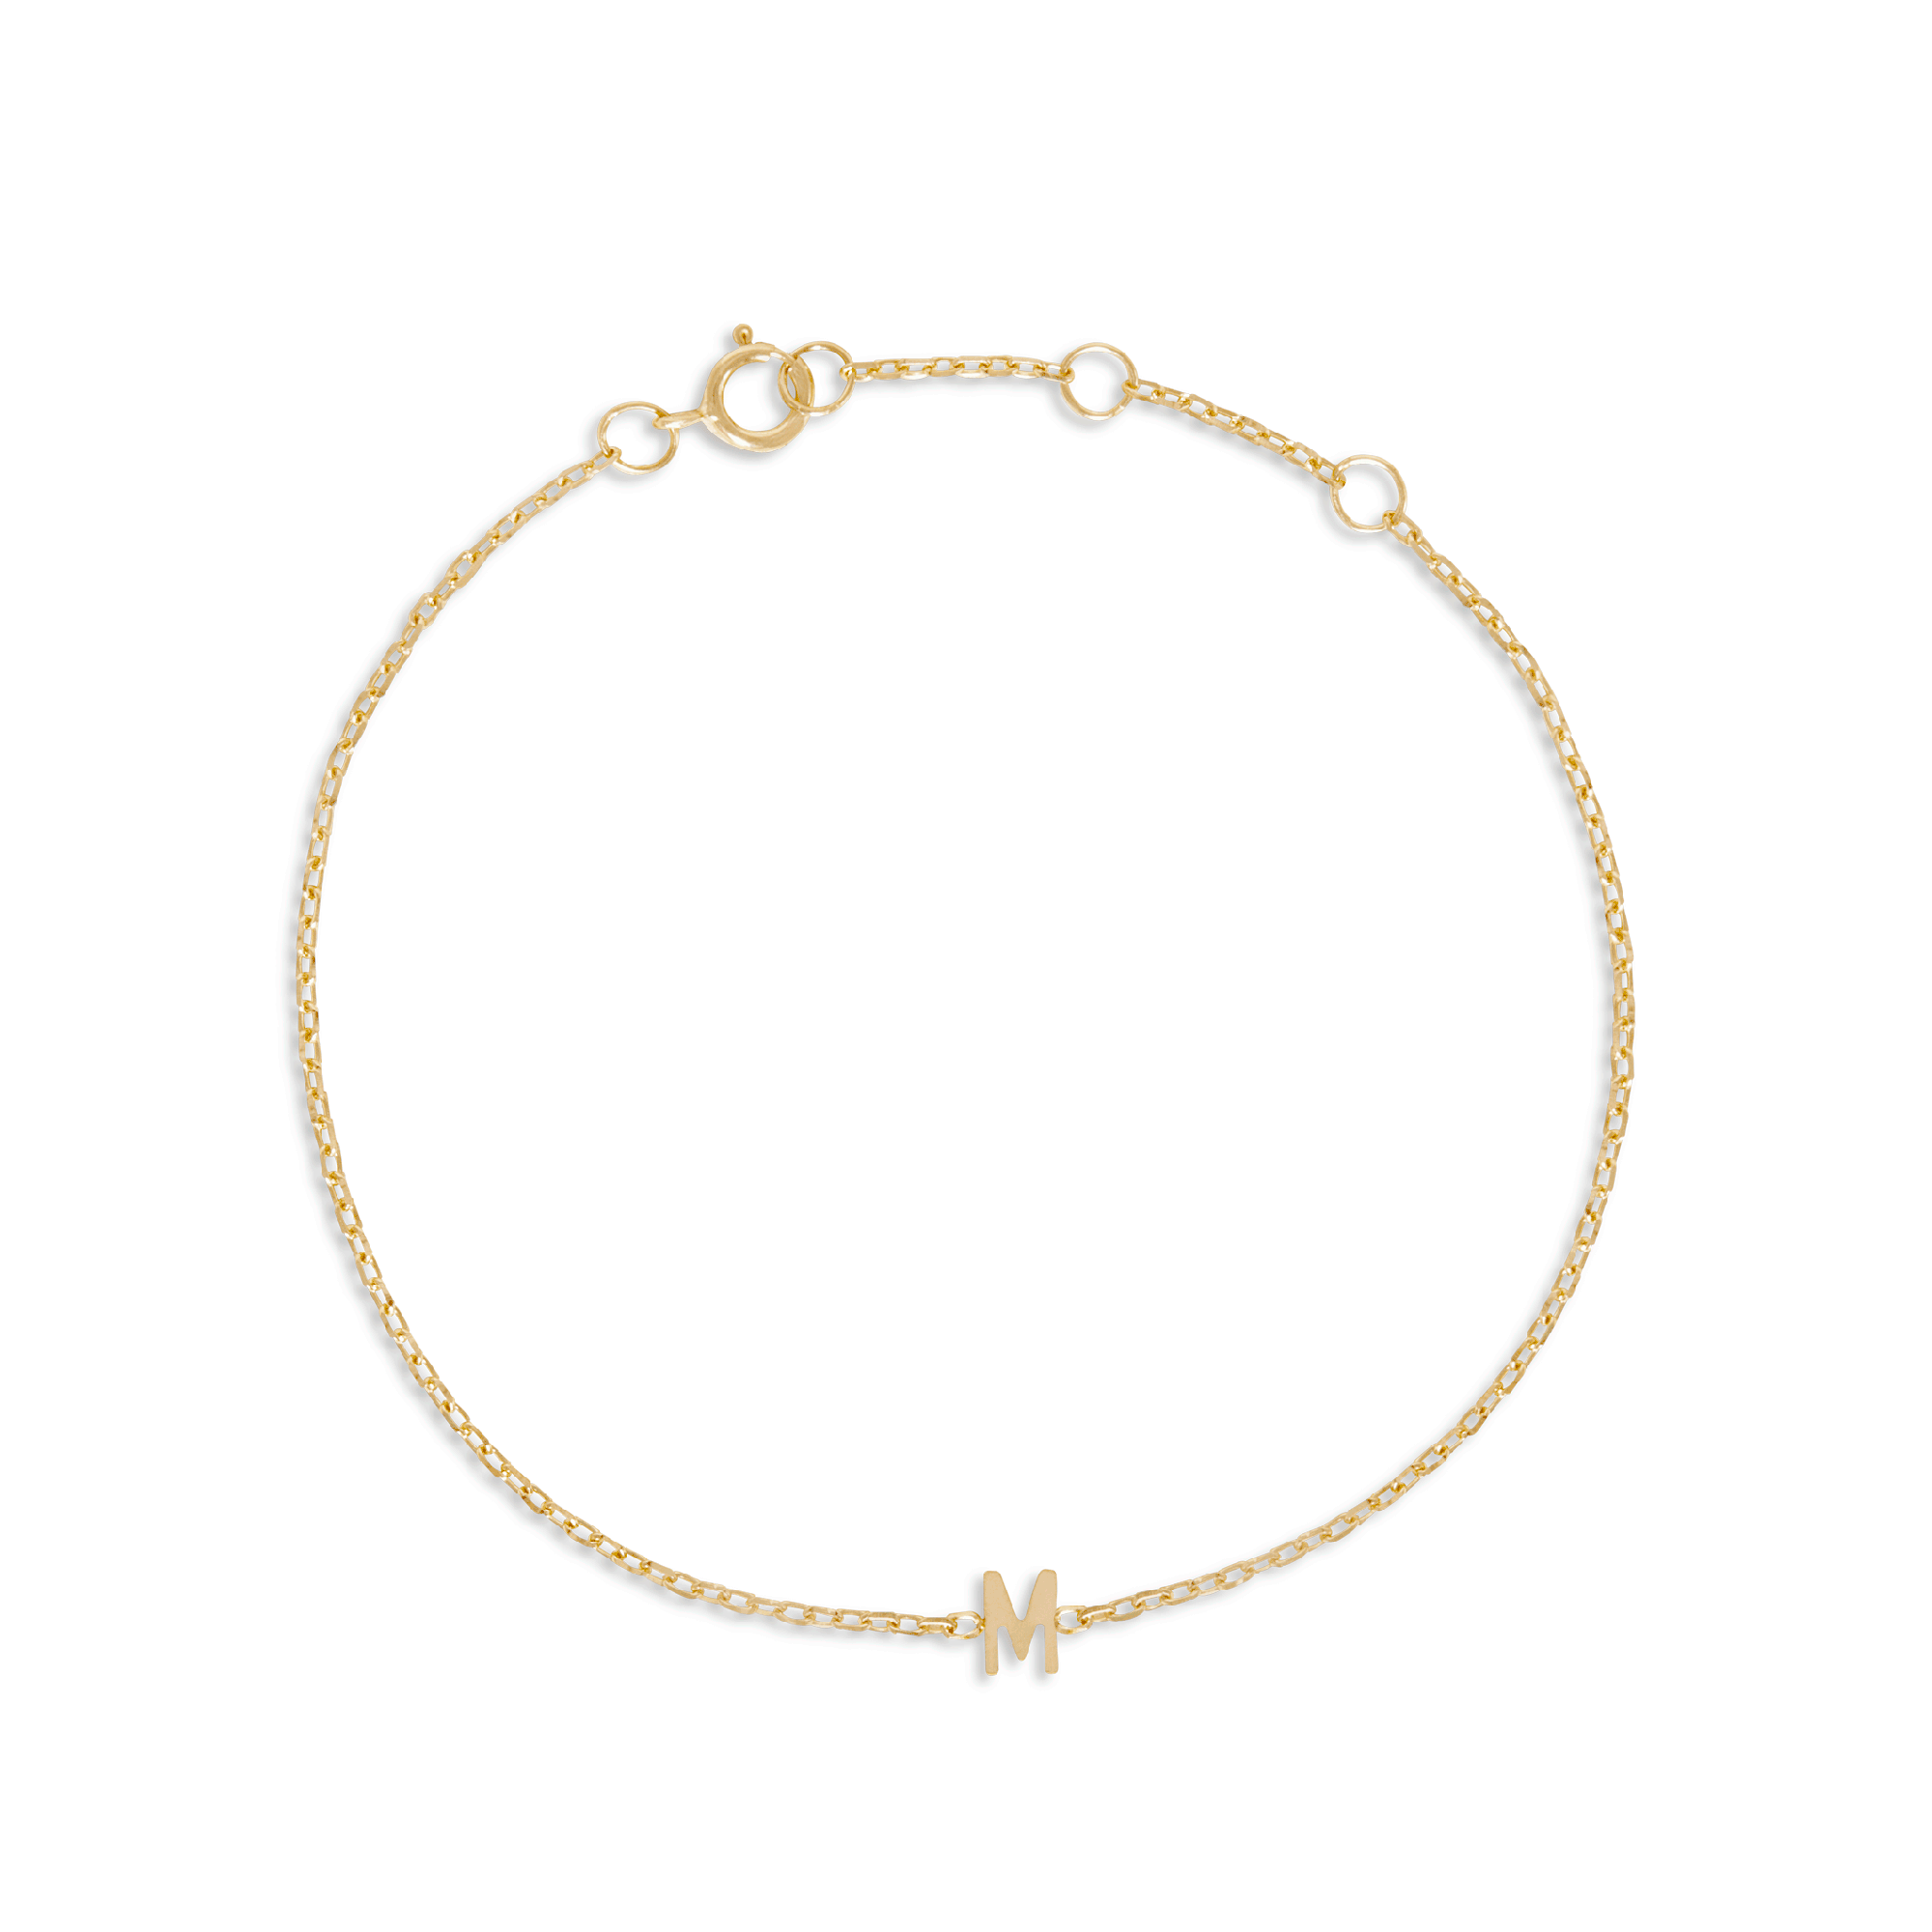 Stone and Strand Gold Initial Bracelet